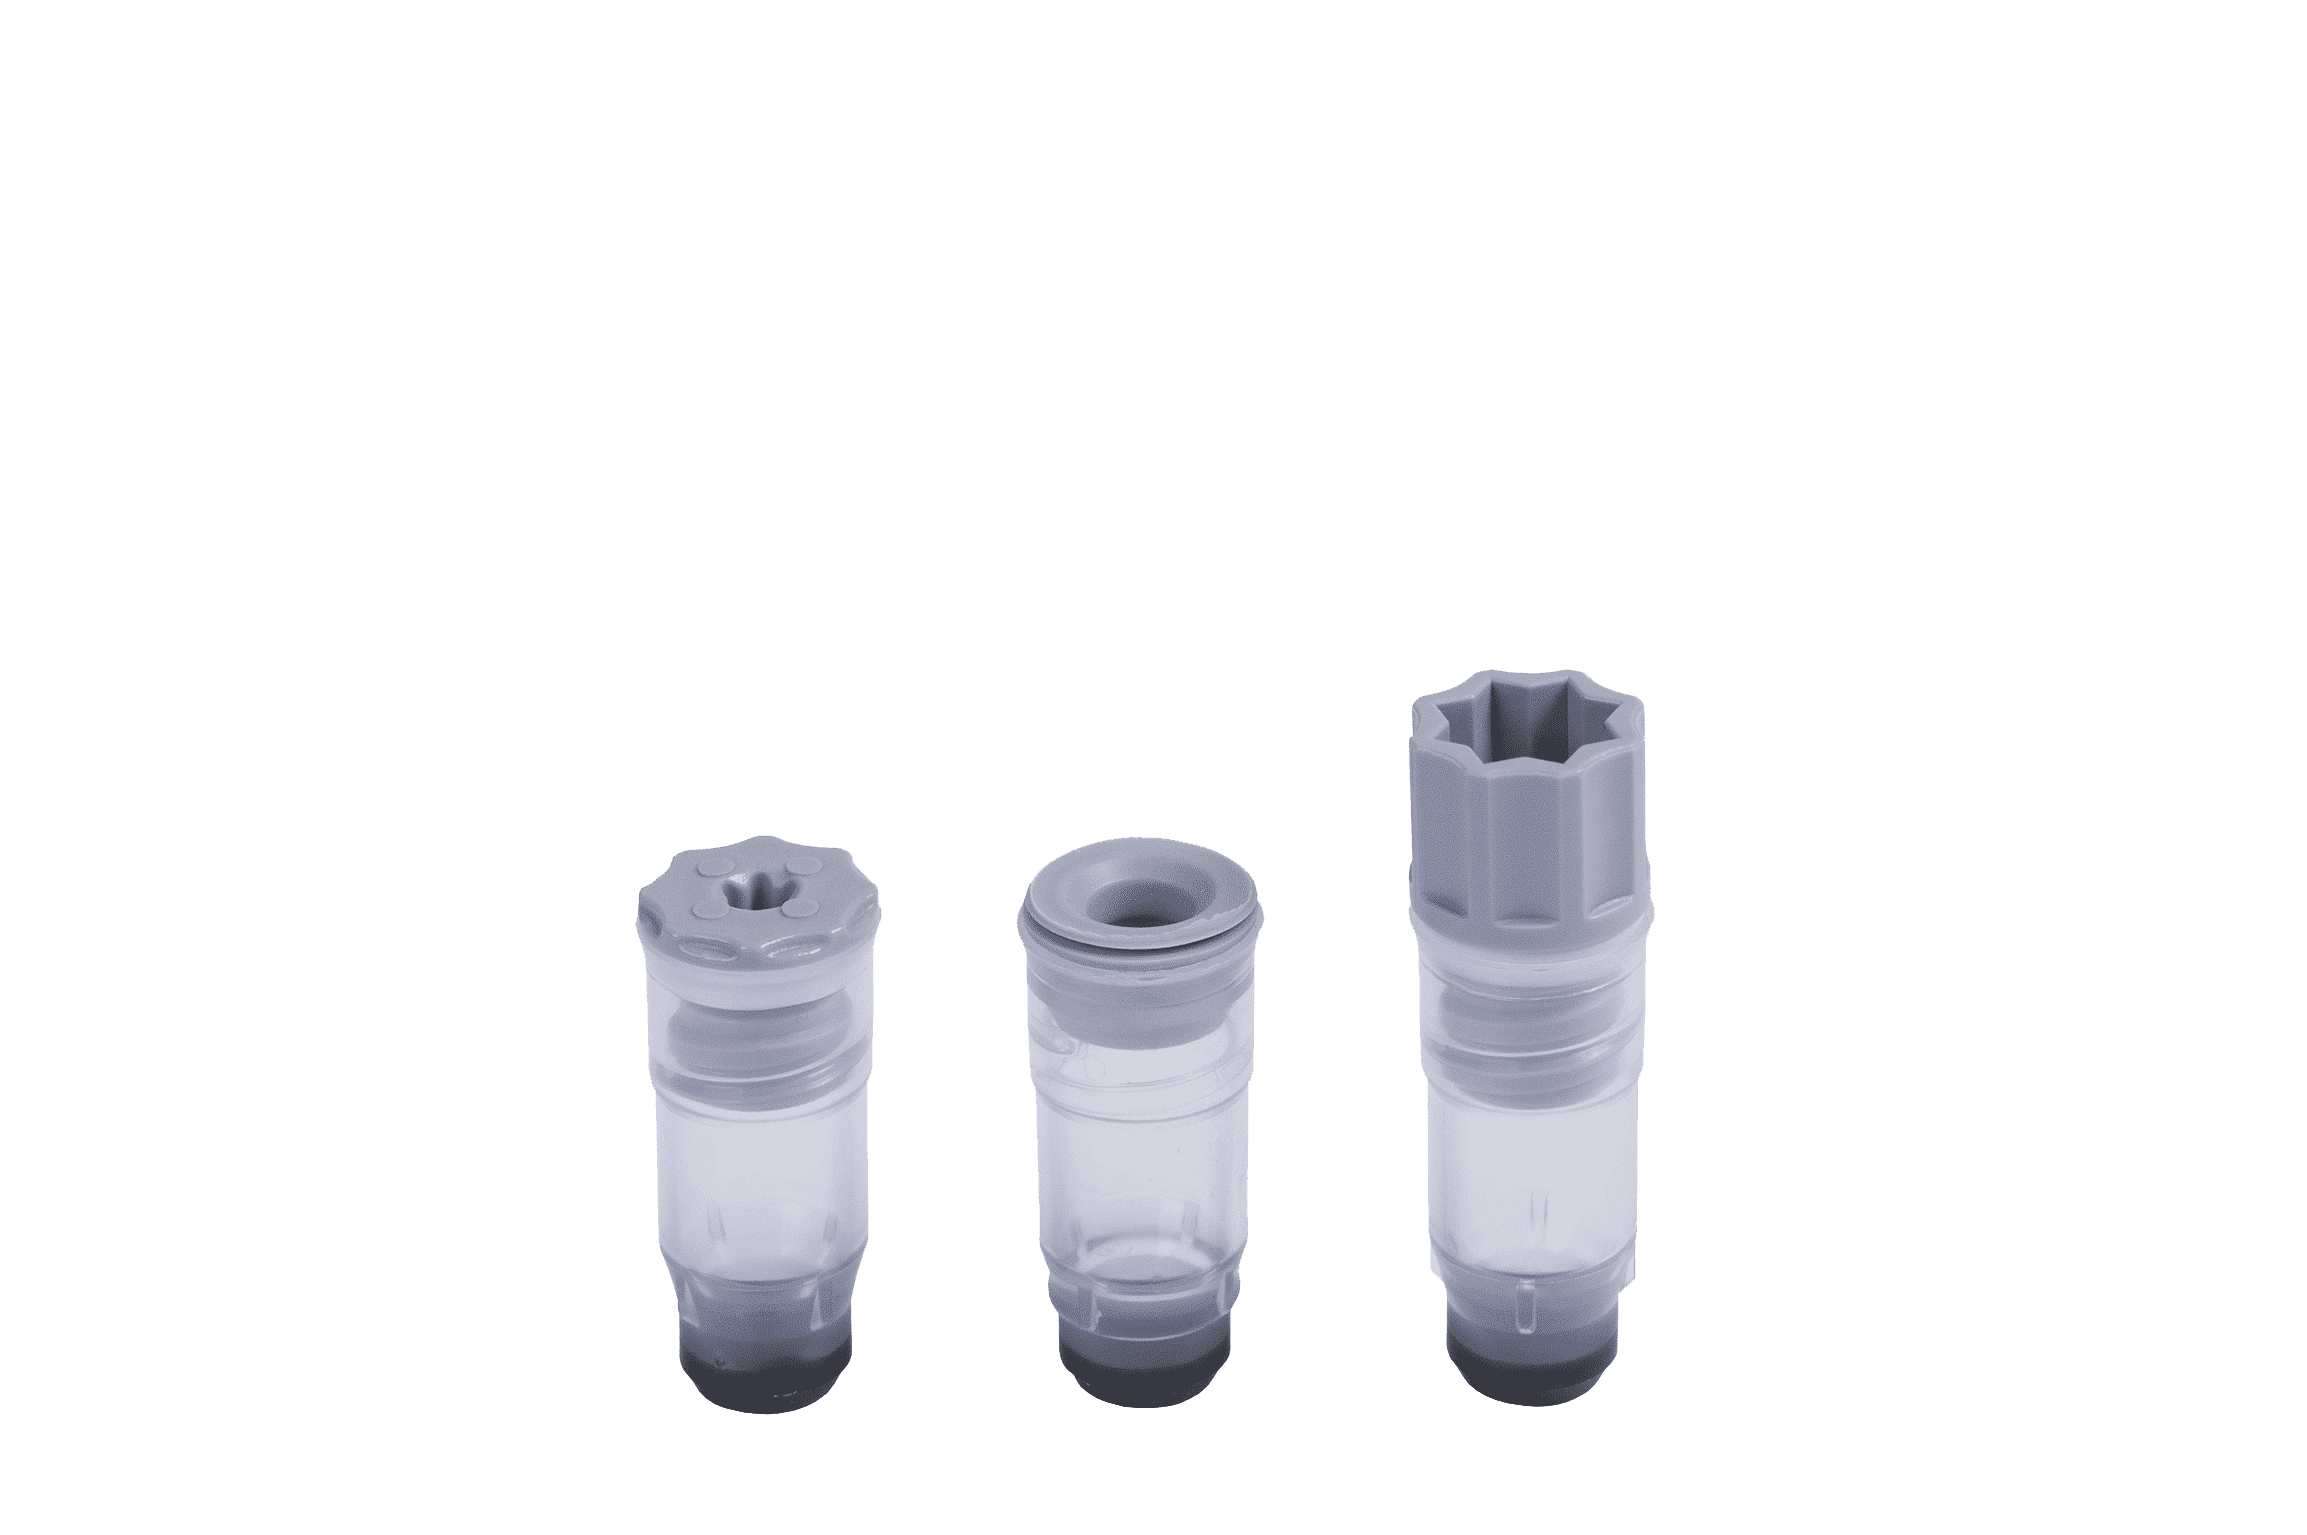 0.50ml internal thread tubes precapped with grey push caps and screw caps